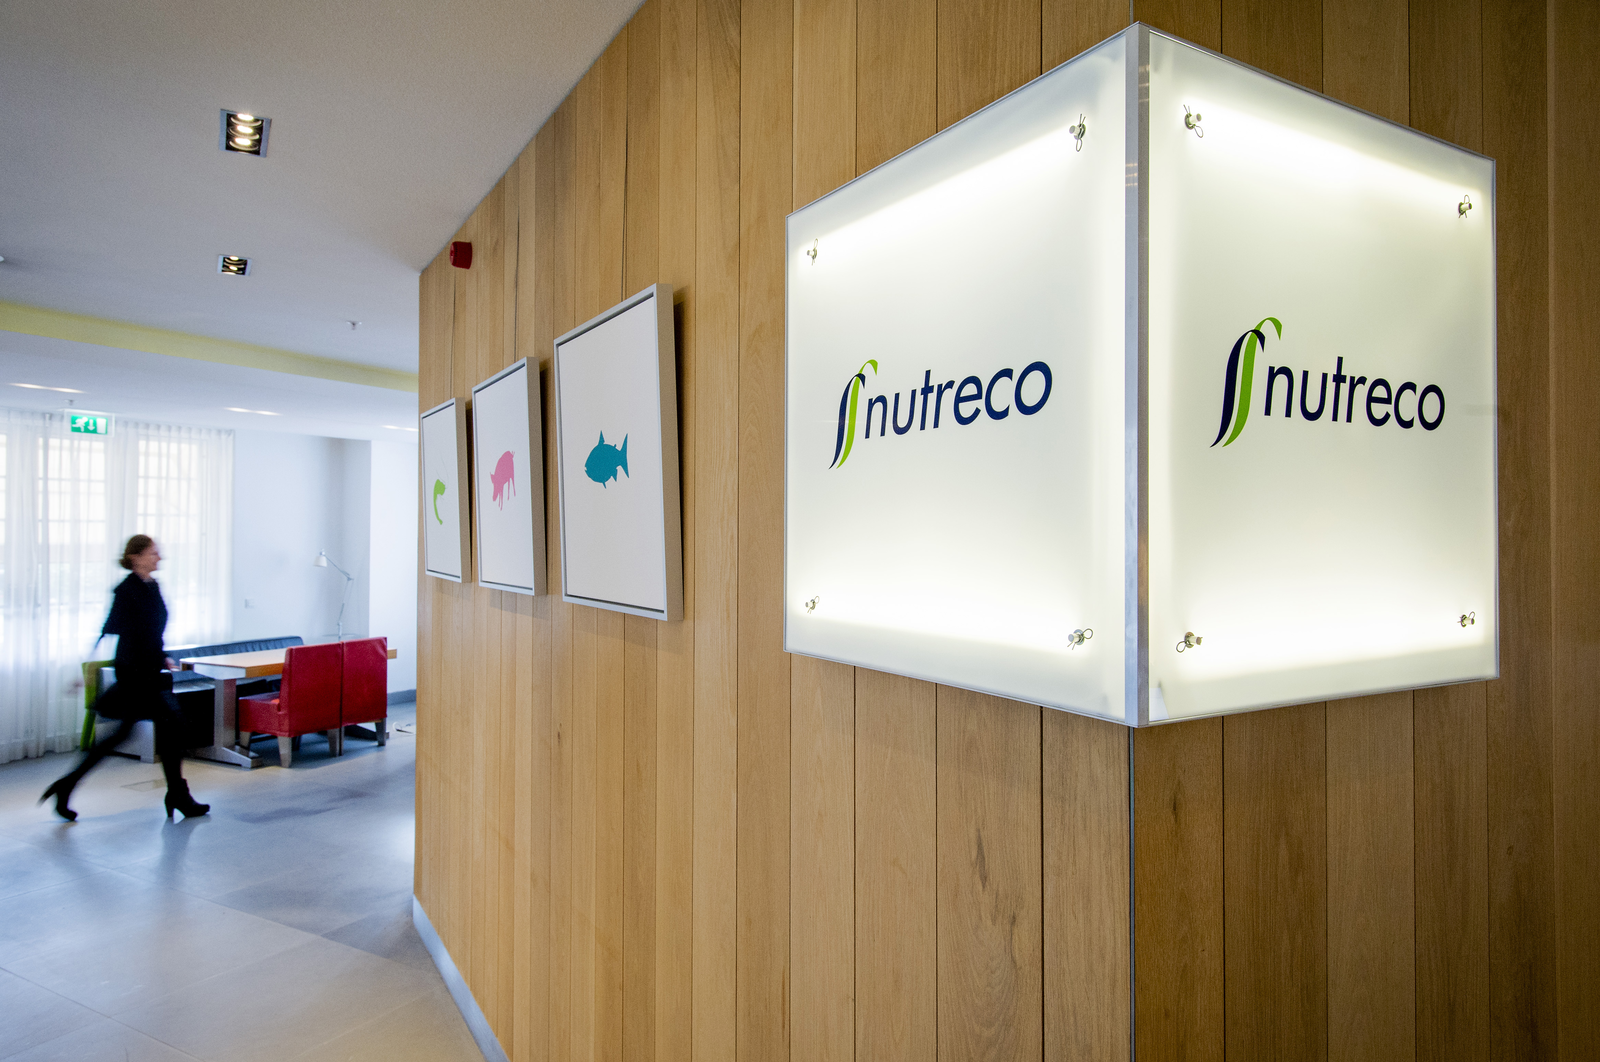 Nutreco to fully support final cash offer from SHV